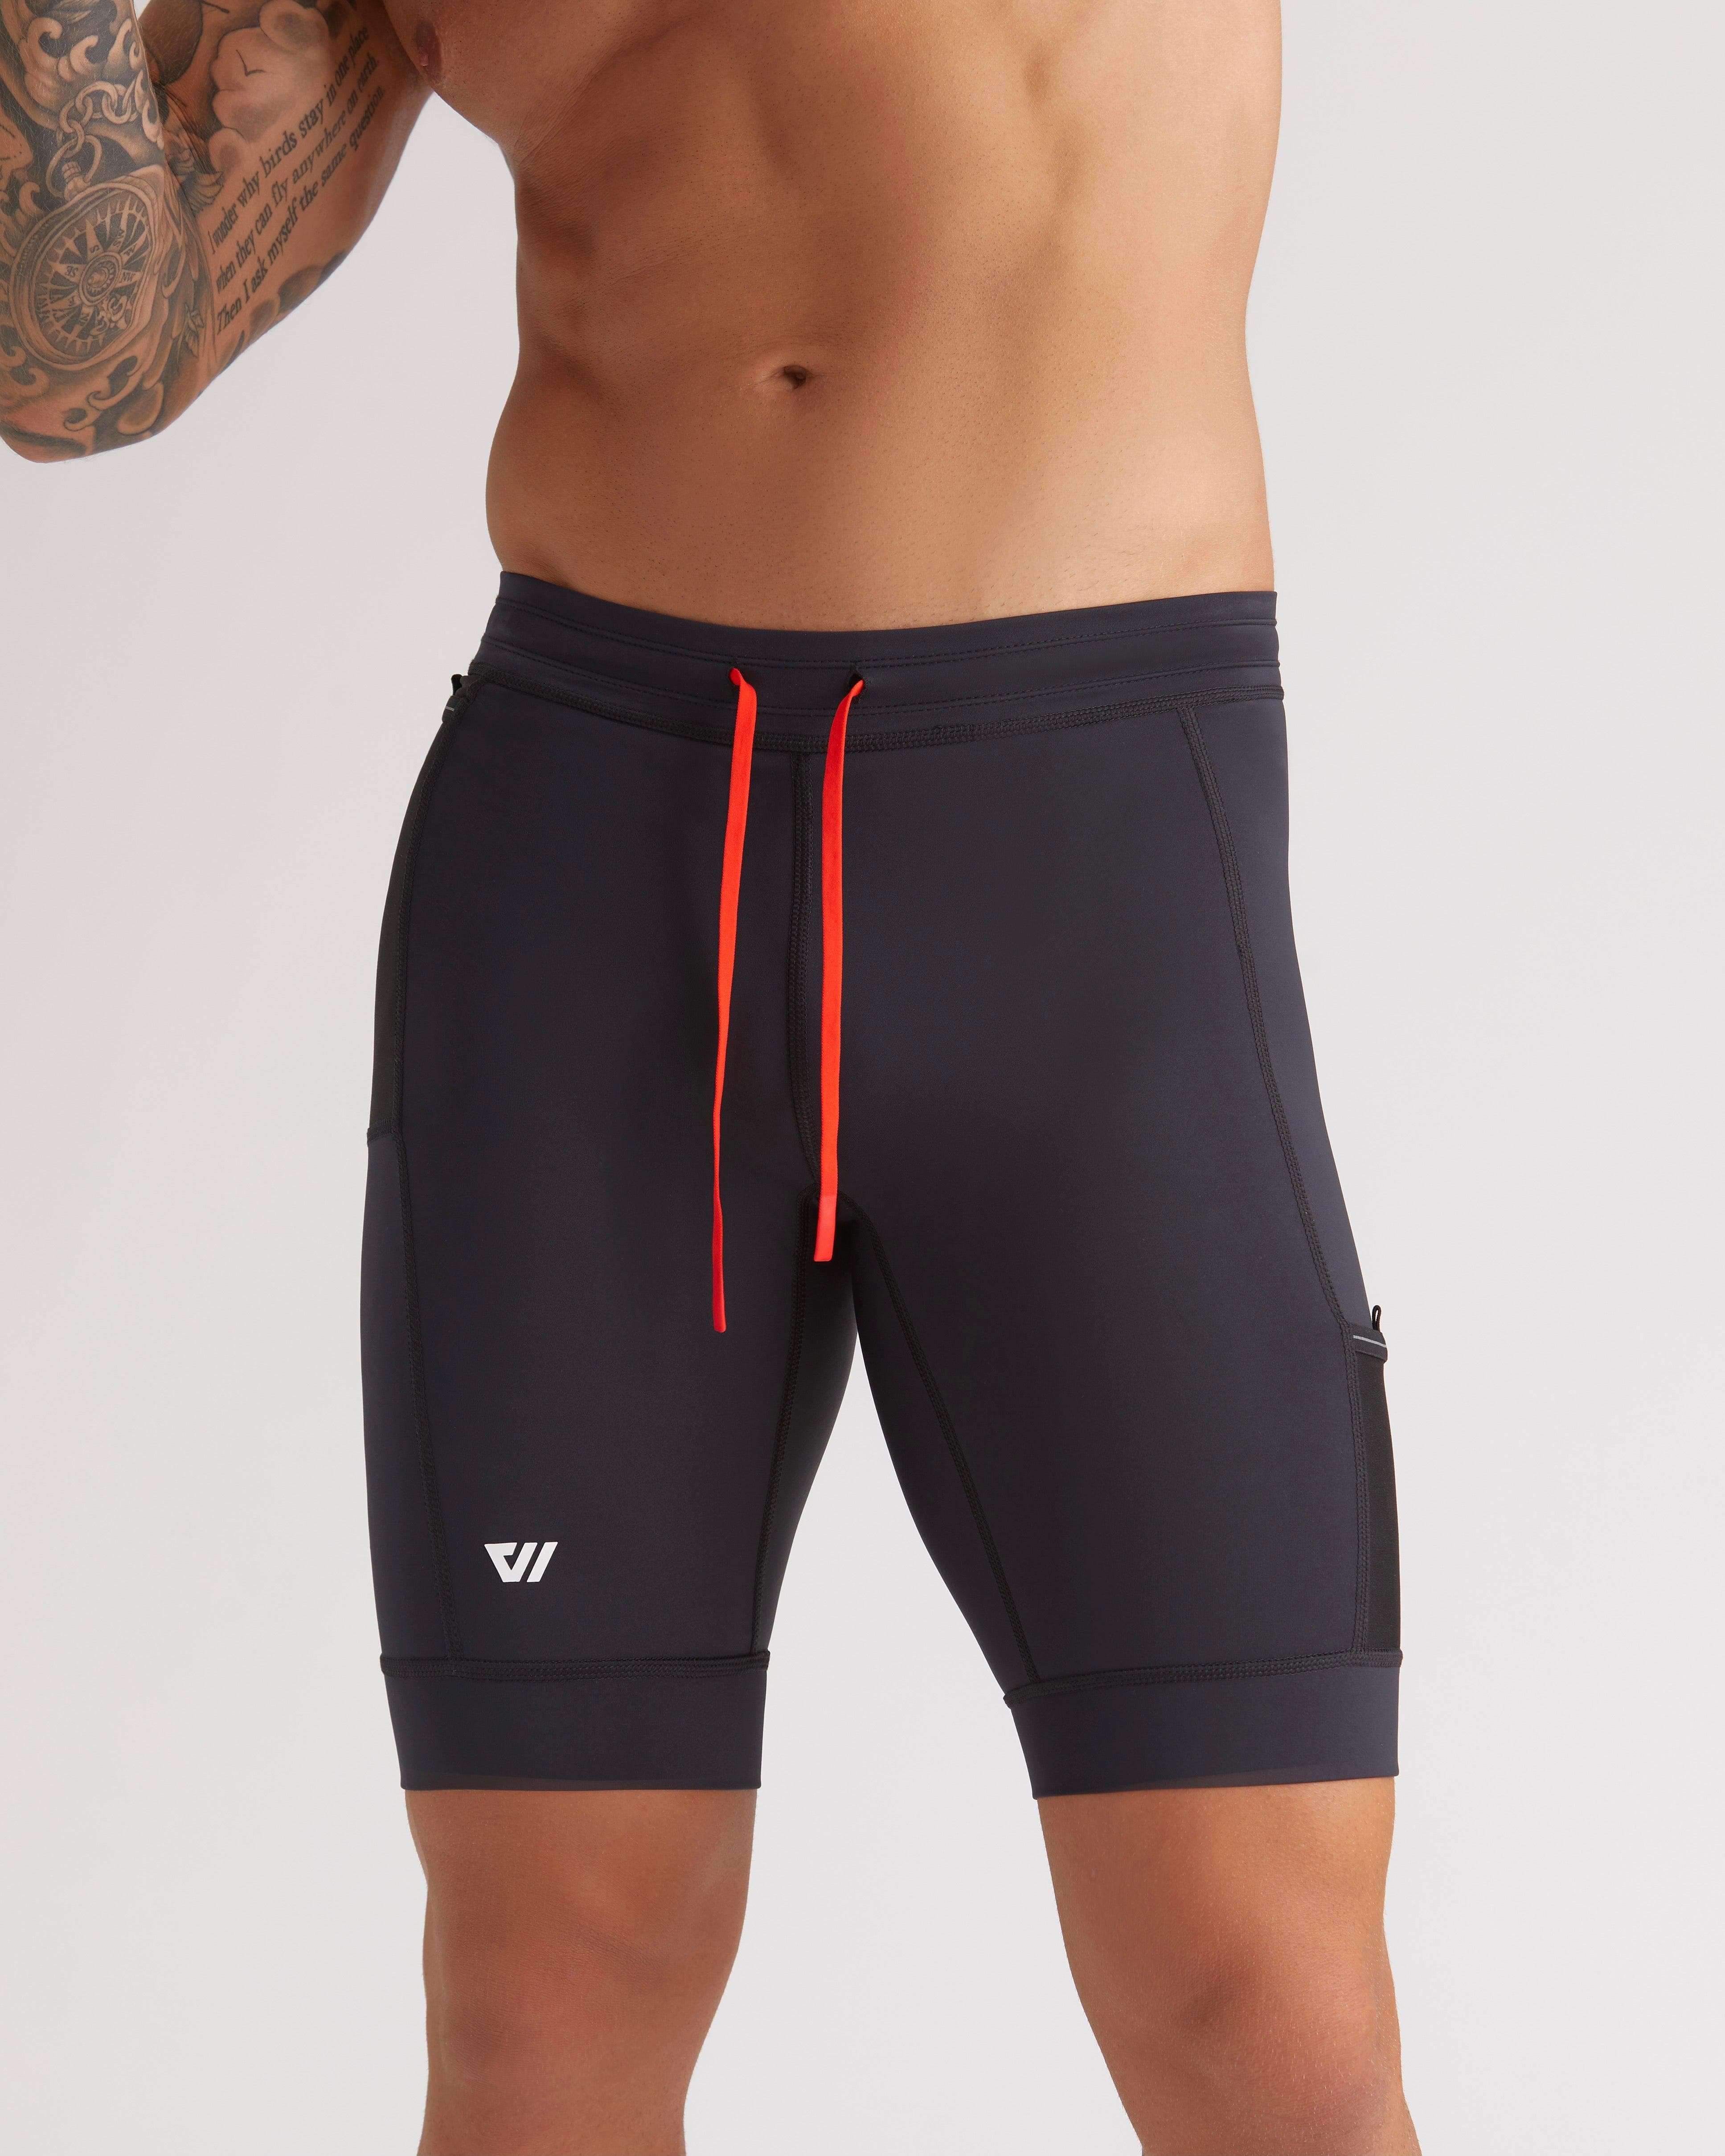 Half tights “modesty” question for men : r/running